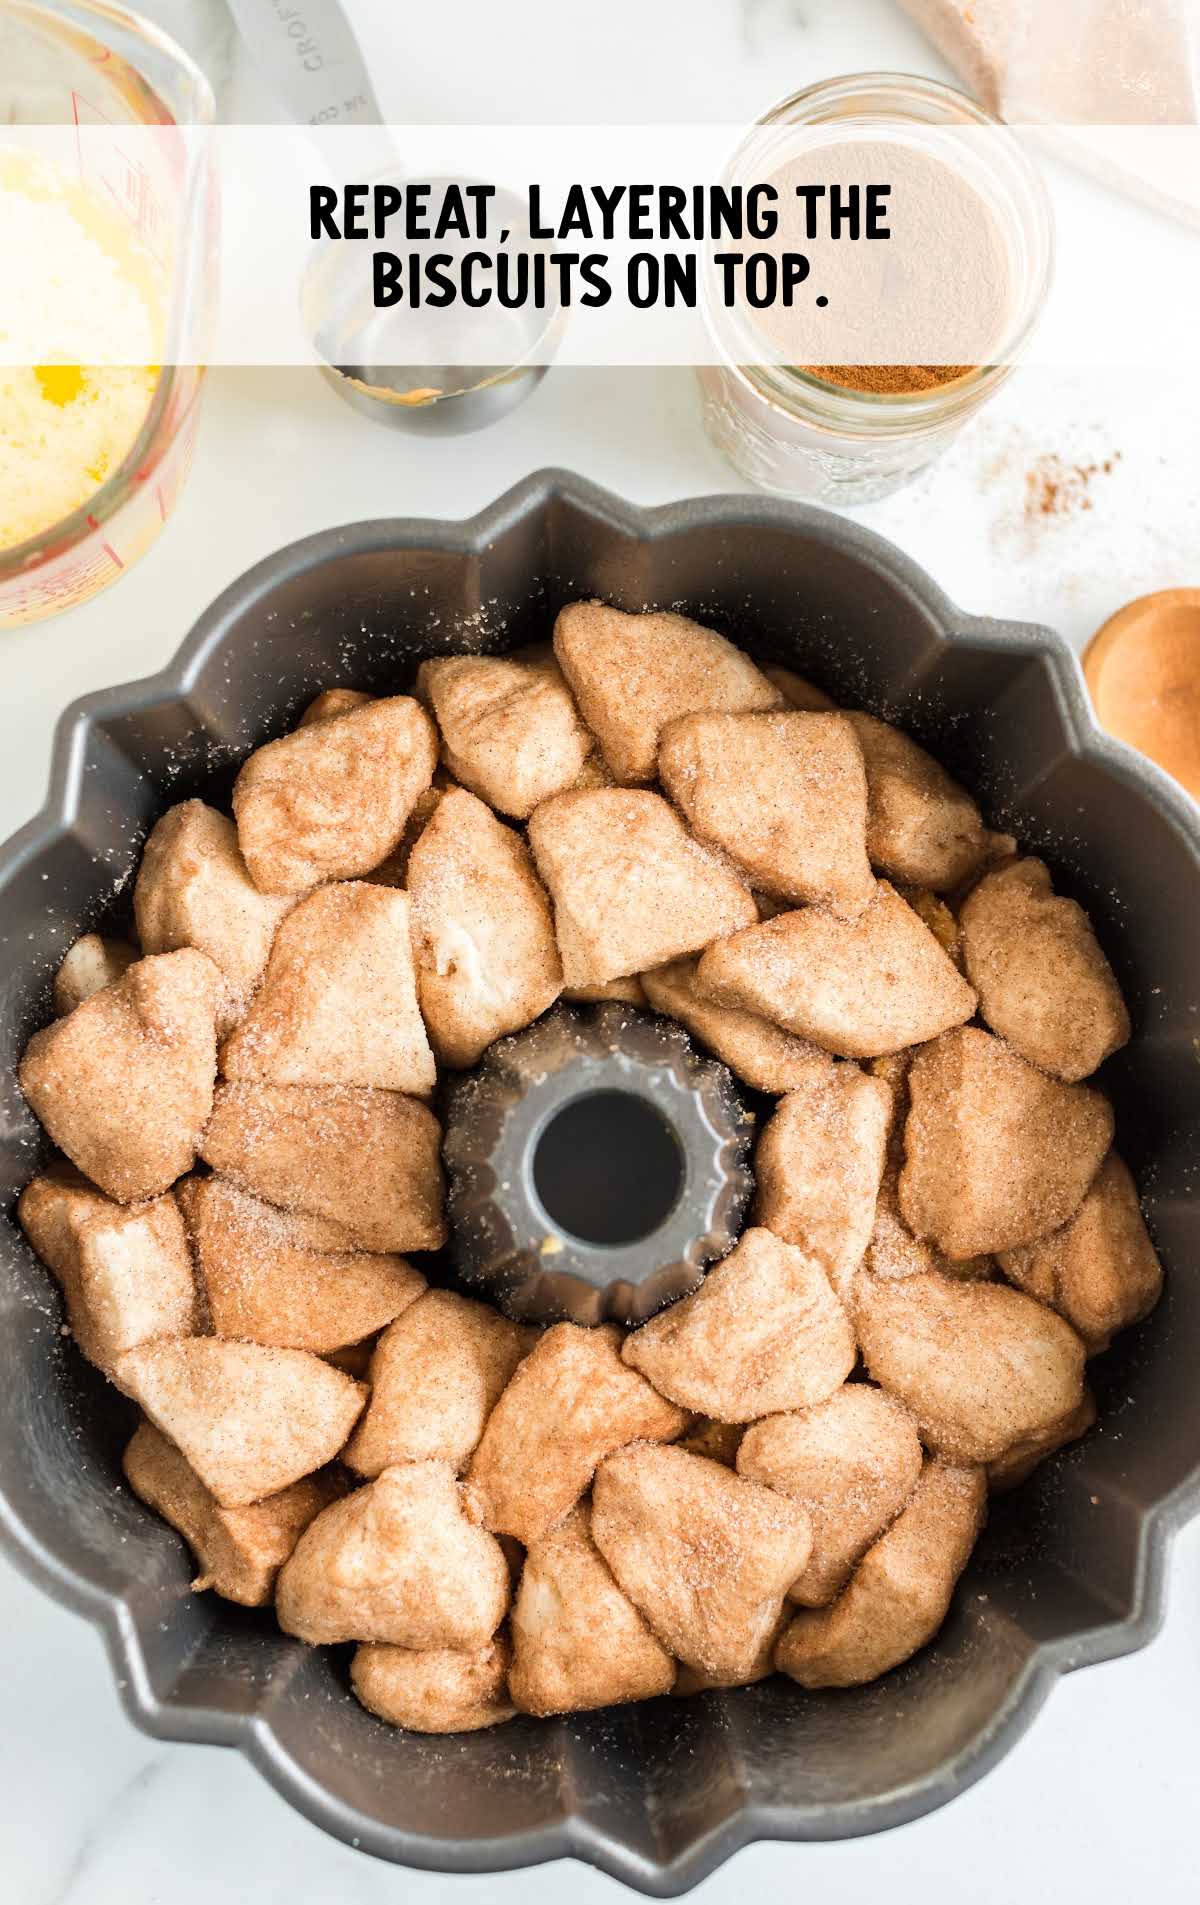 more biscuits placed into the bundt pan